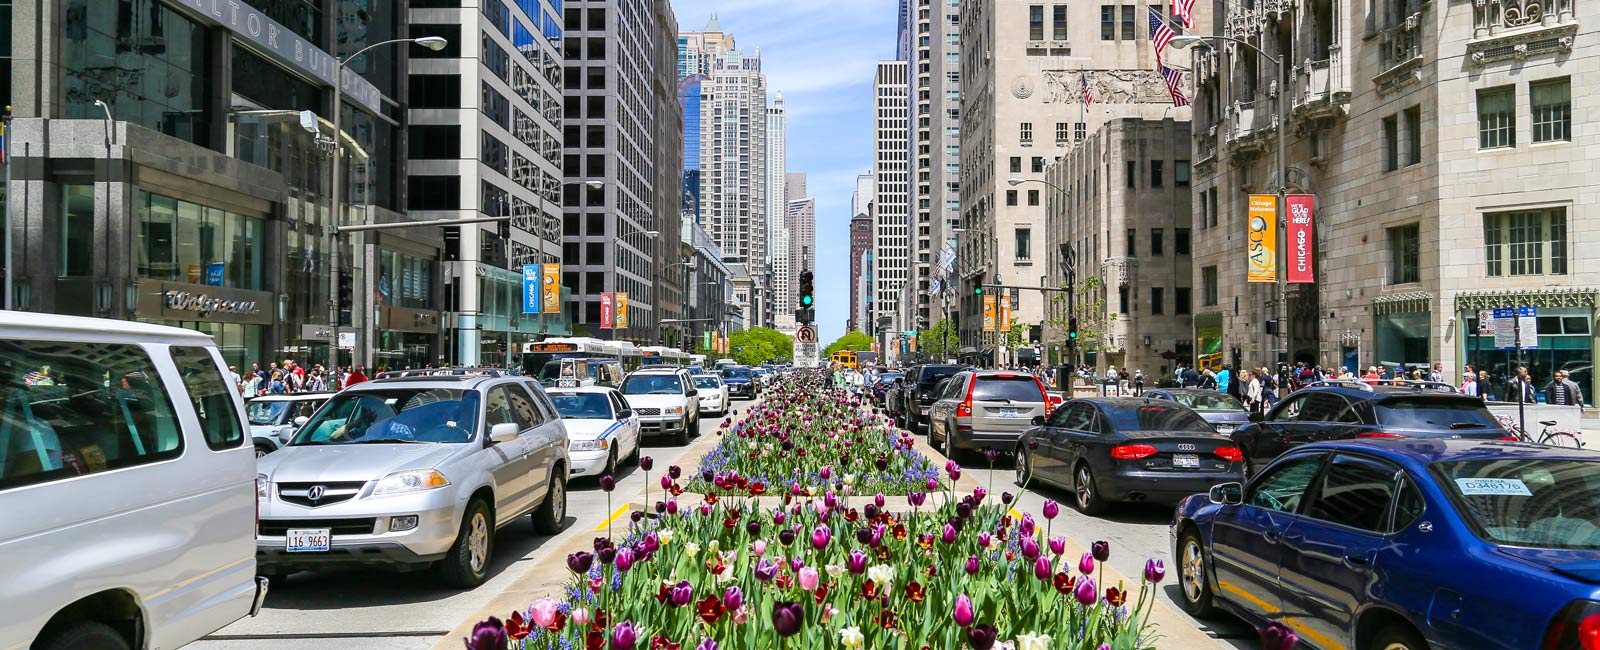 Enjoy the Magnificent Mile on a Chicago vacation with Hilton Grand Vacations